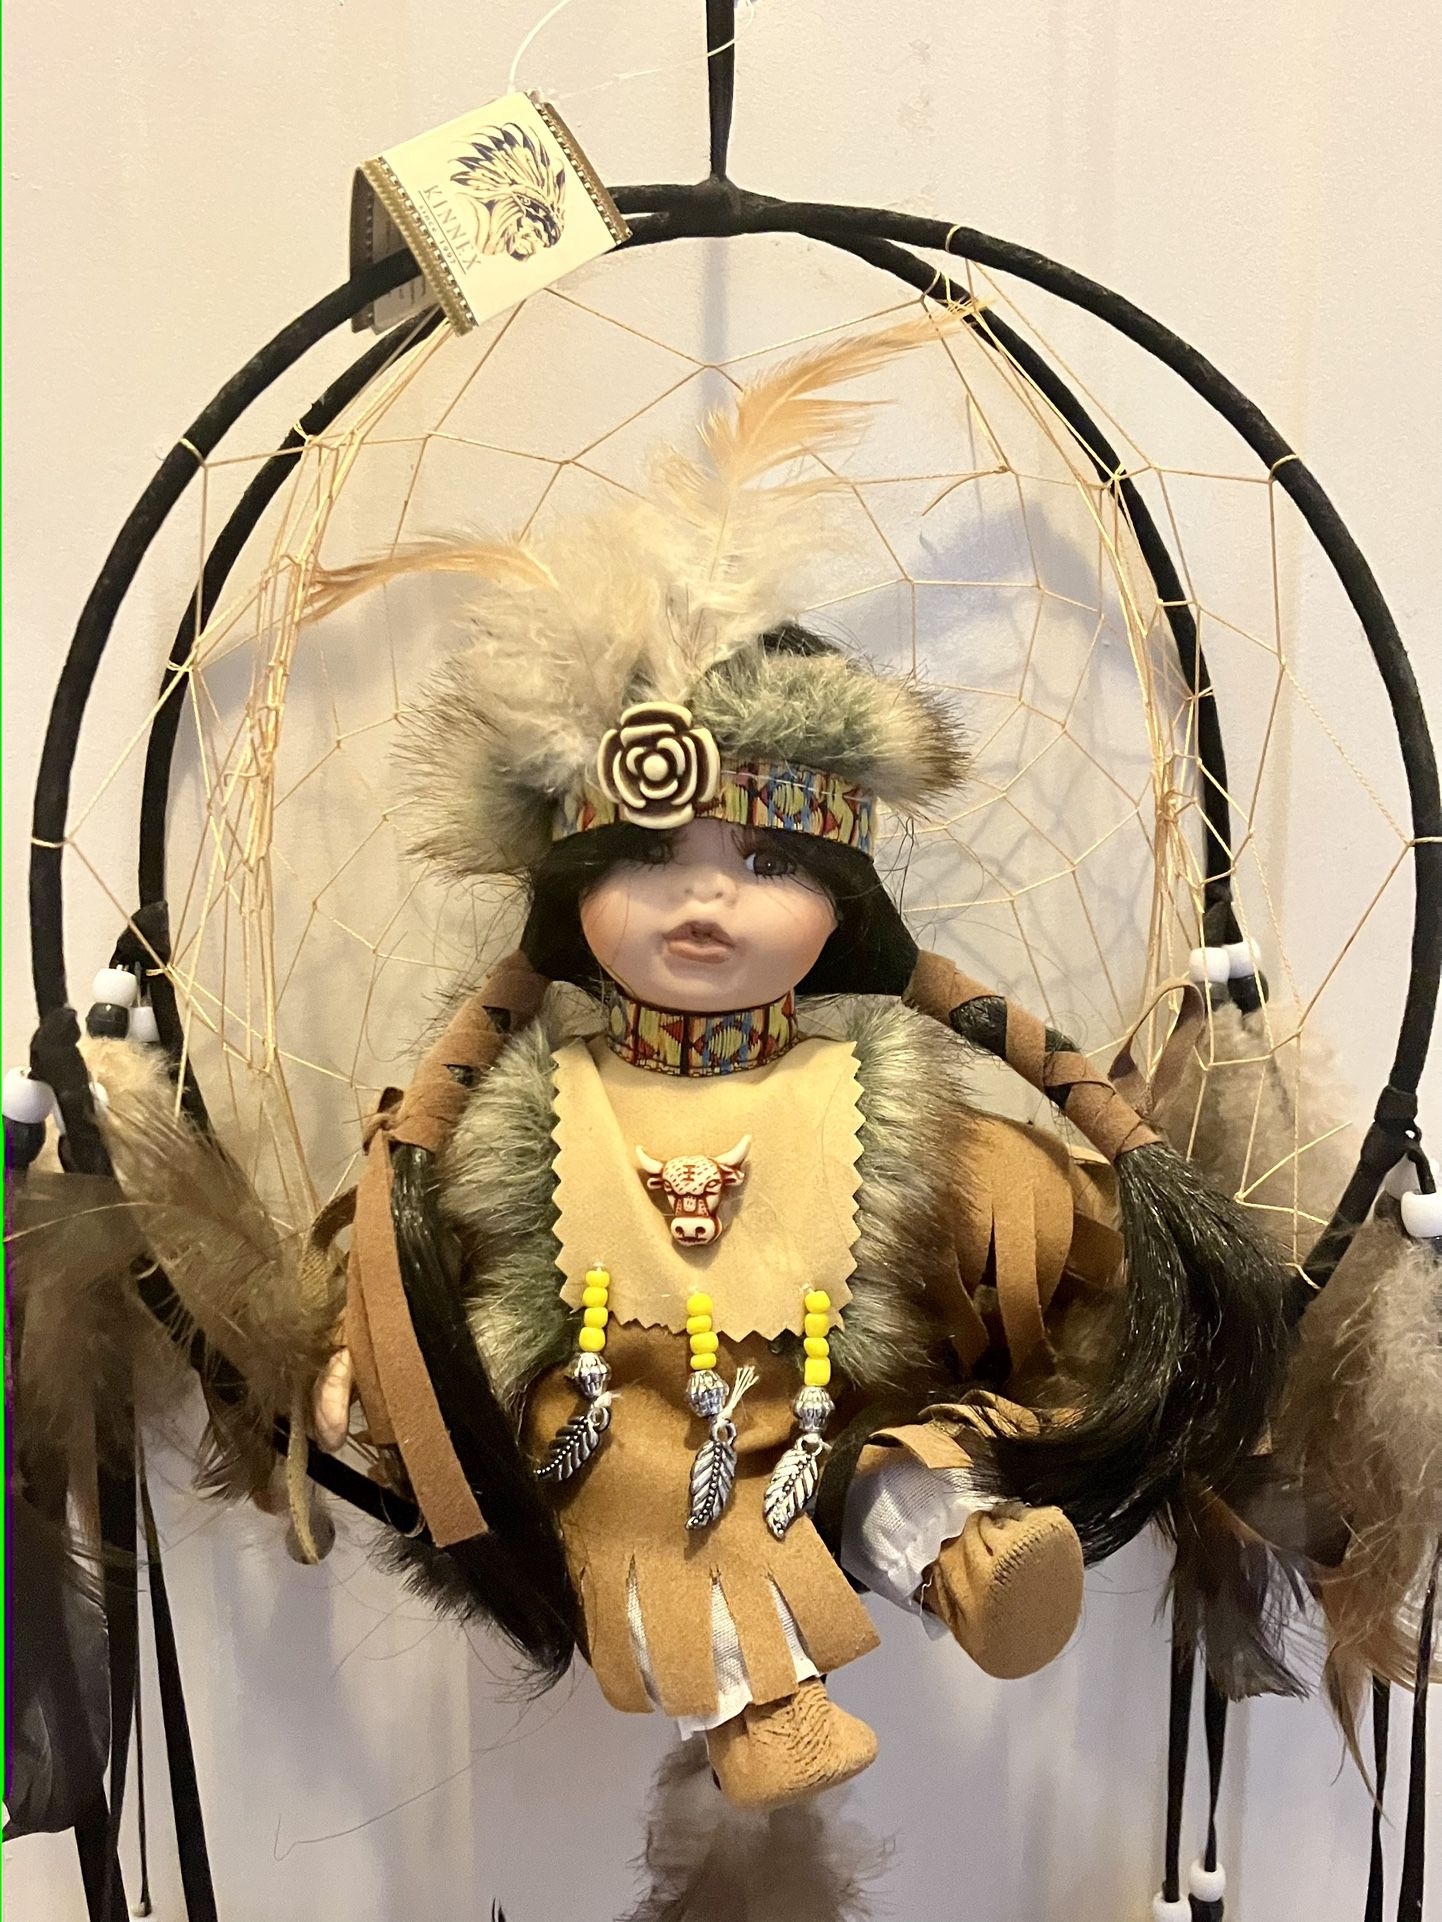 KINNEX NATIVE AMERICAN GIRL PORCELAIN DOLL DREAMCATHER 10" ‼️ Hard To Find ‼️ Price Is FIRM ‼️